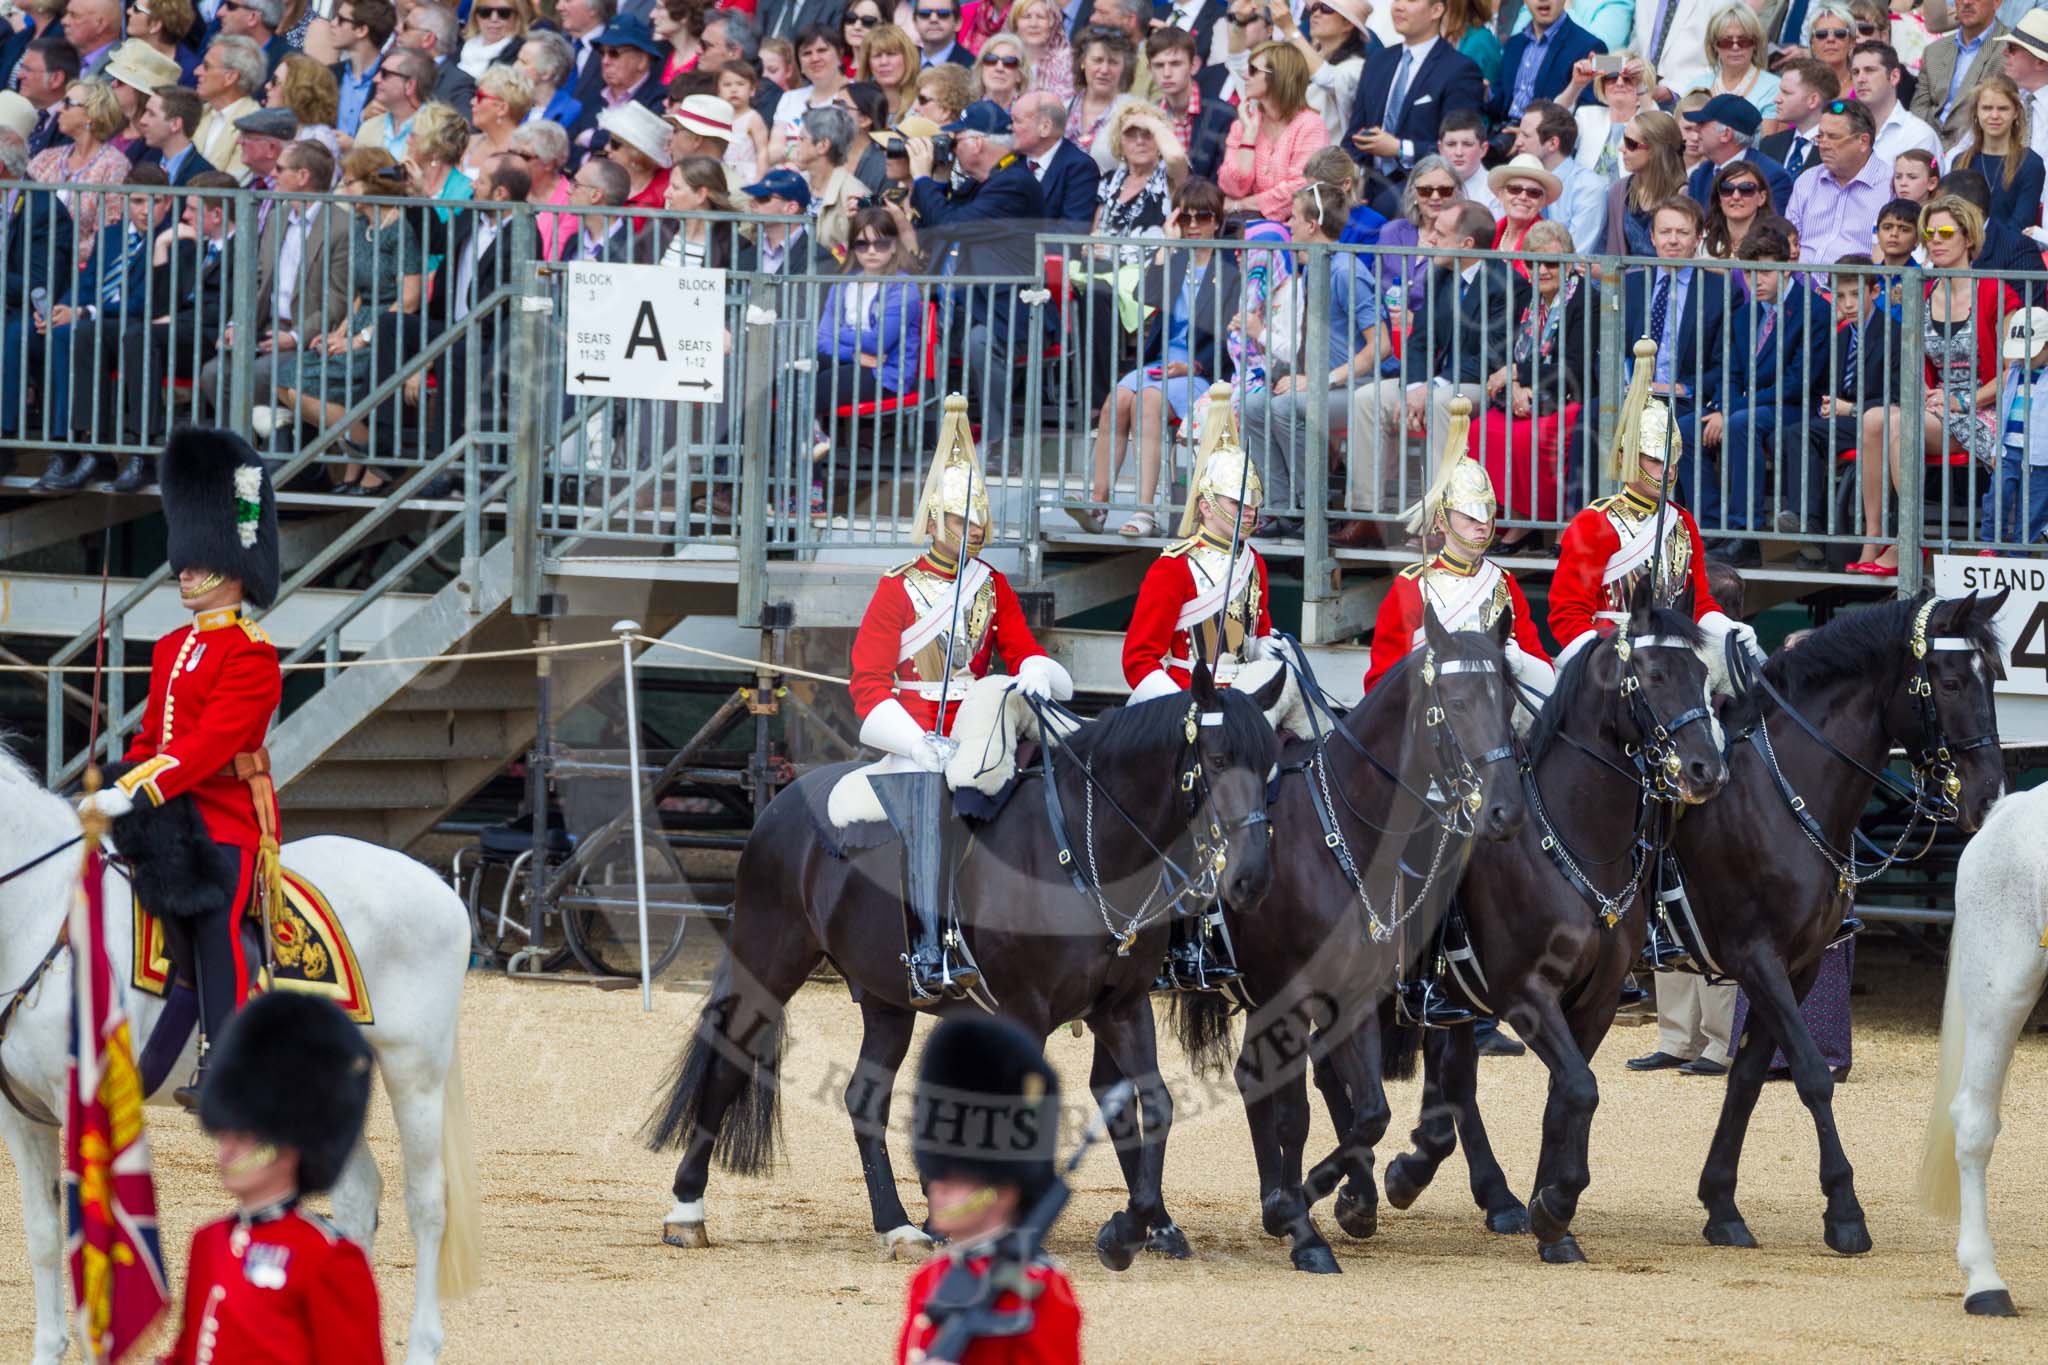 The Colonel's Review 2015.
Horse Guards Parade, Westminster,
London,

United Kingdom,
on 06 June 2015 at 10:56, image #162